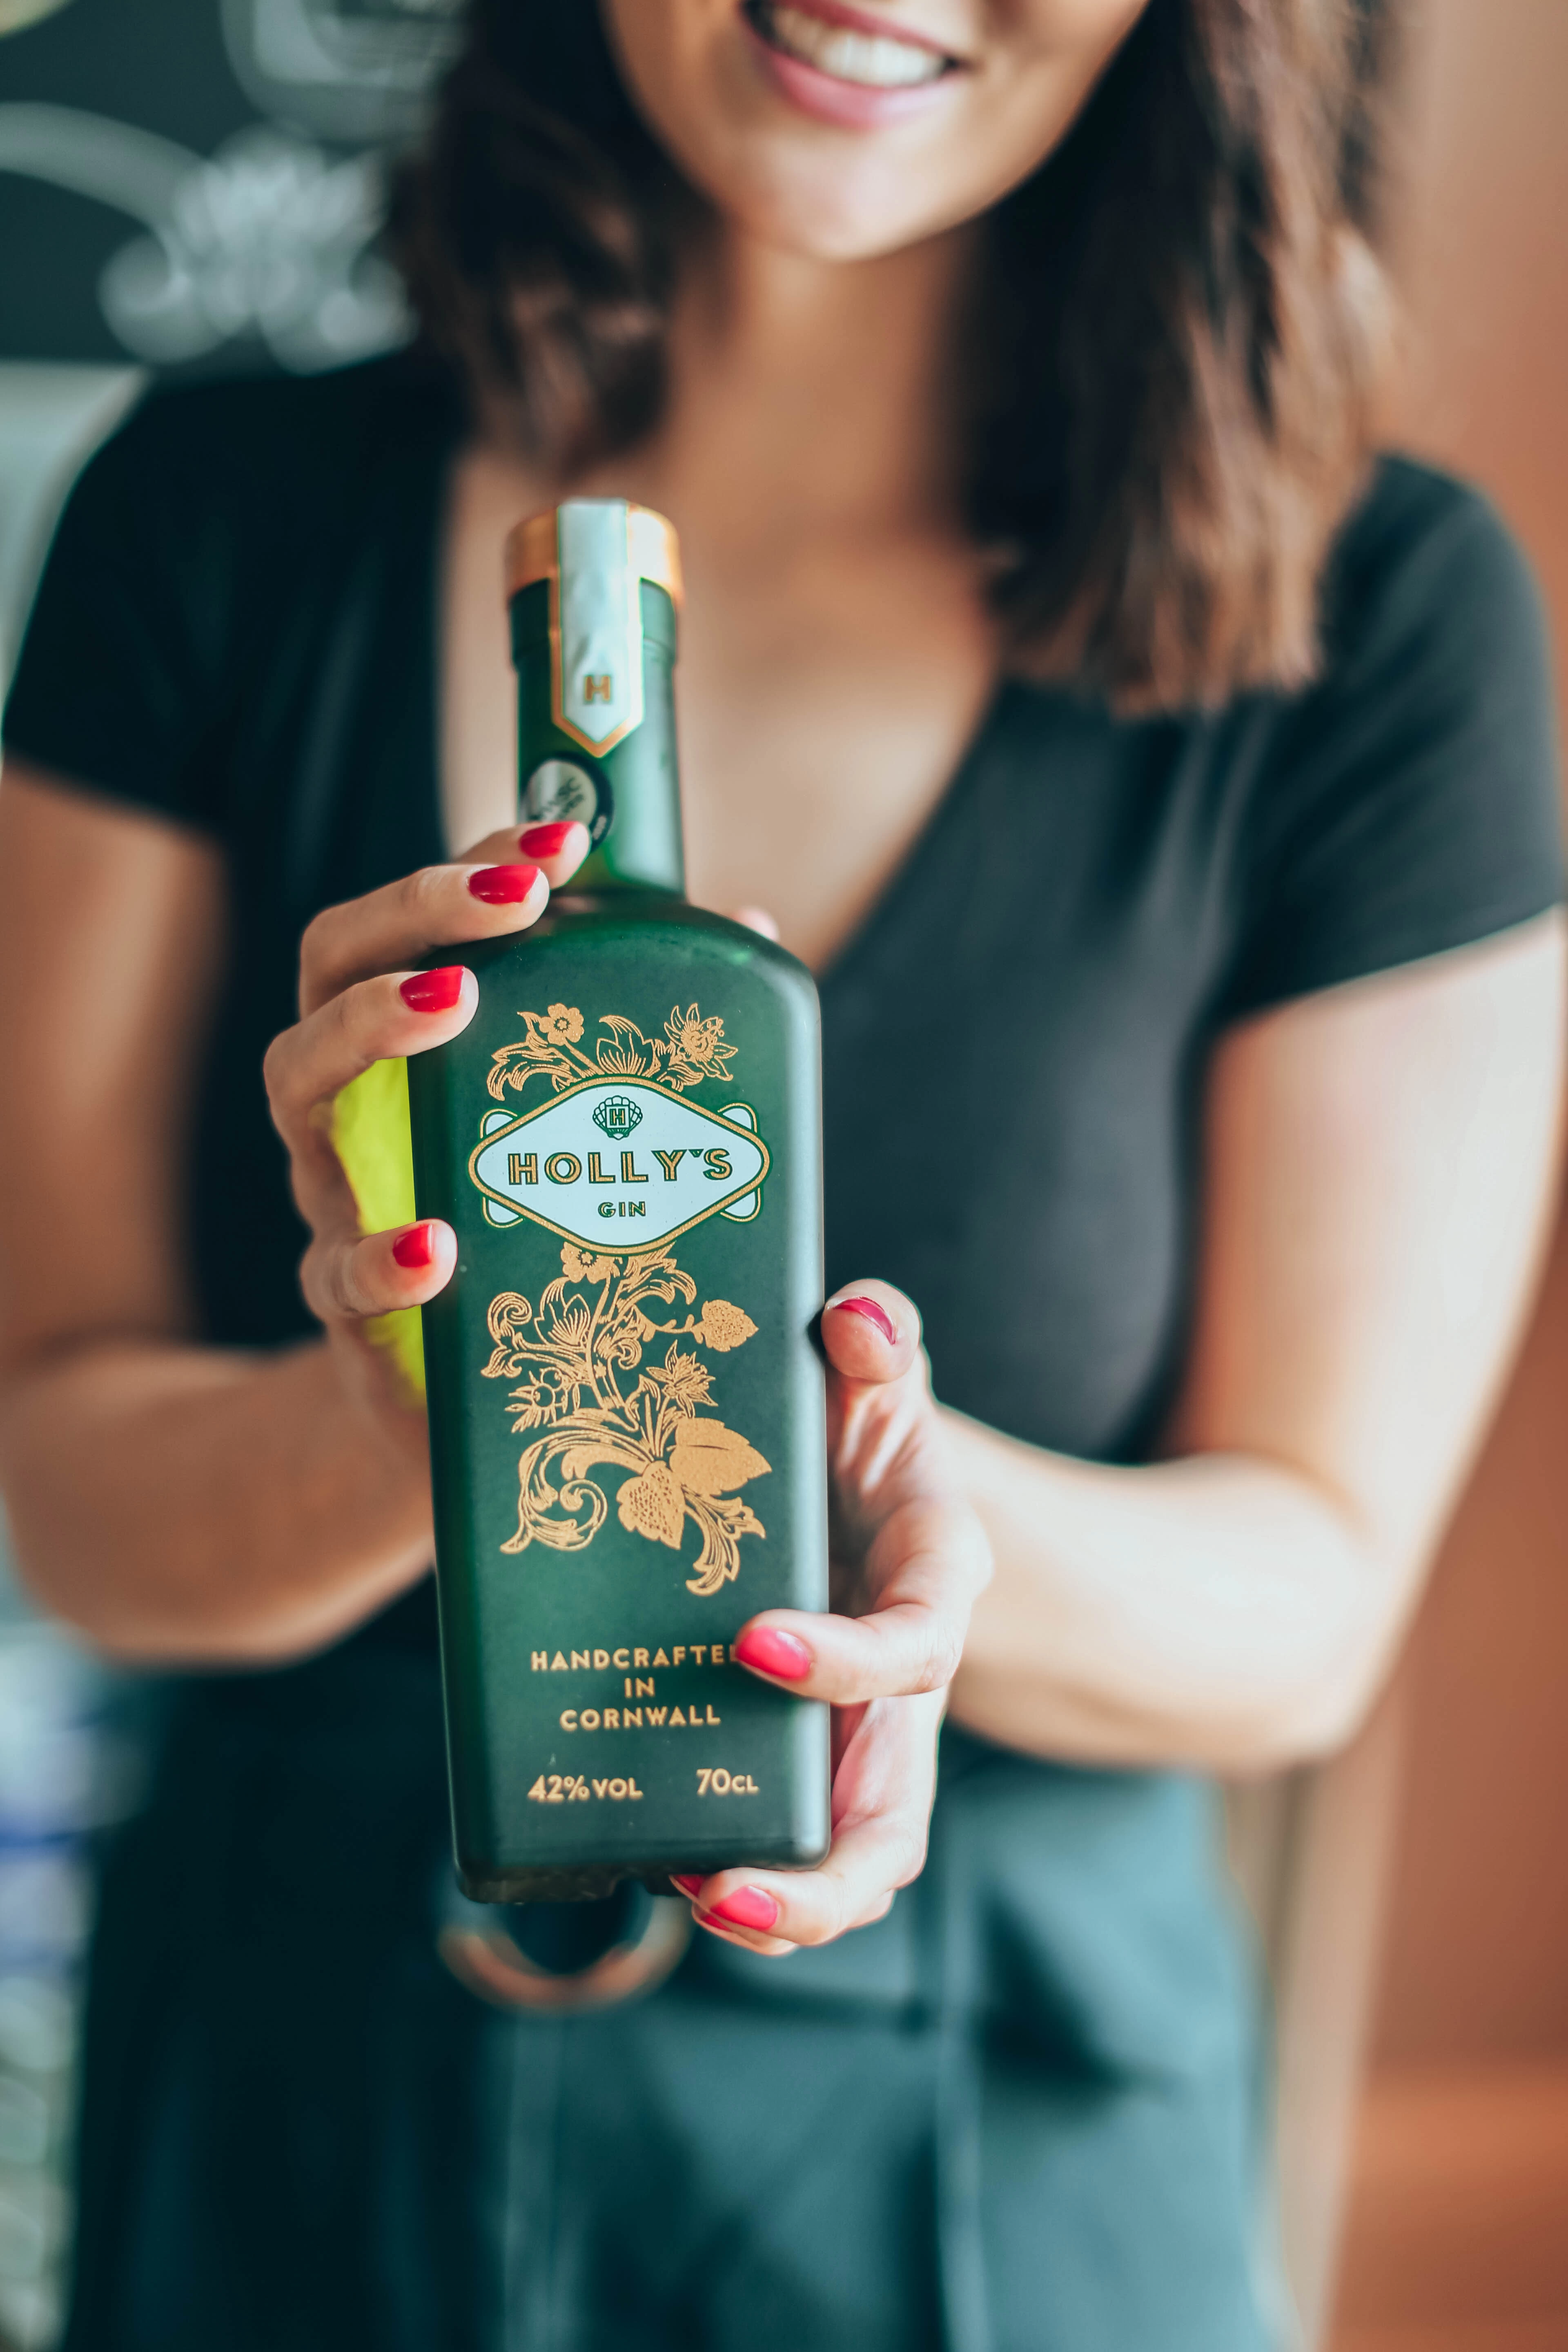 Holly holding a Holly's Gin bottle